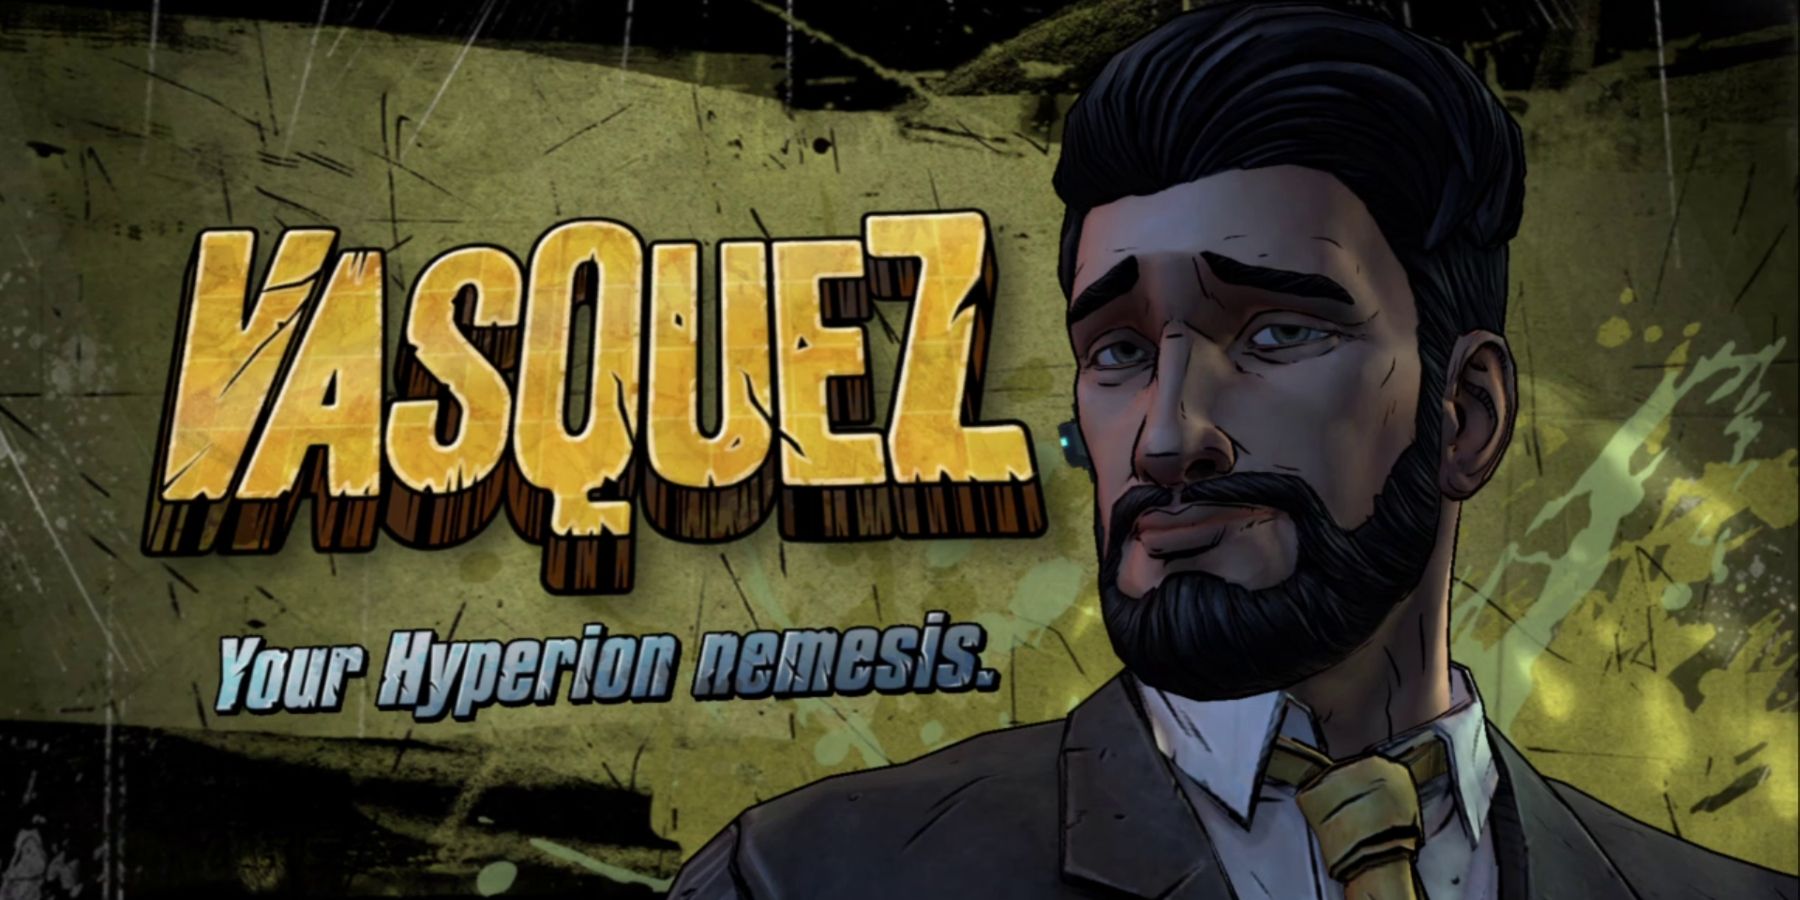 a character card featuring a handsome man with dark hair and beard and a bluetooth headset in his ear. the words read "Vasquez: your hyperion nemesis"